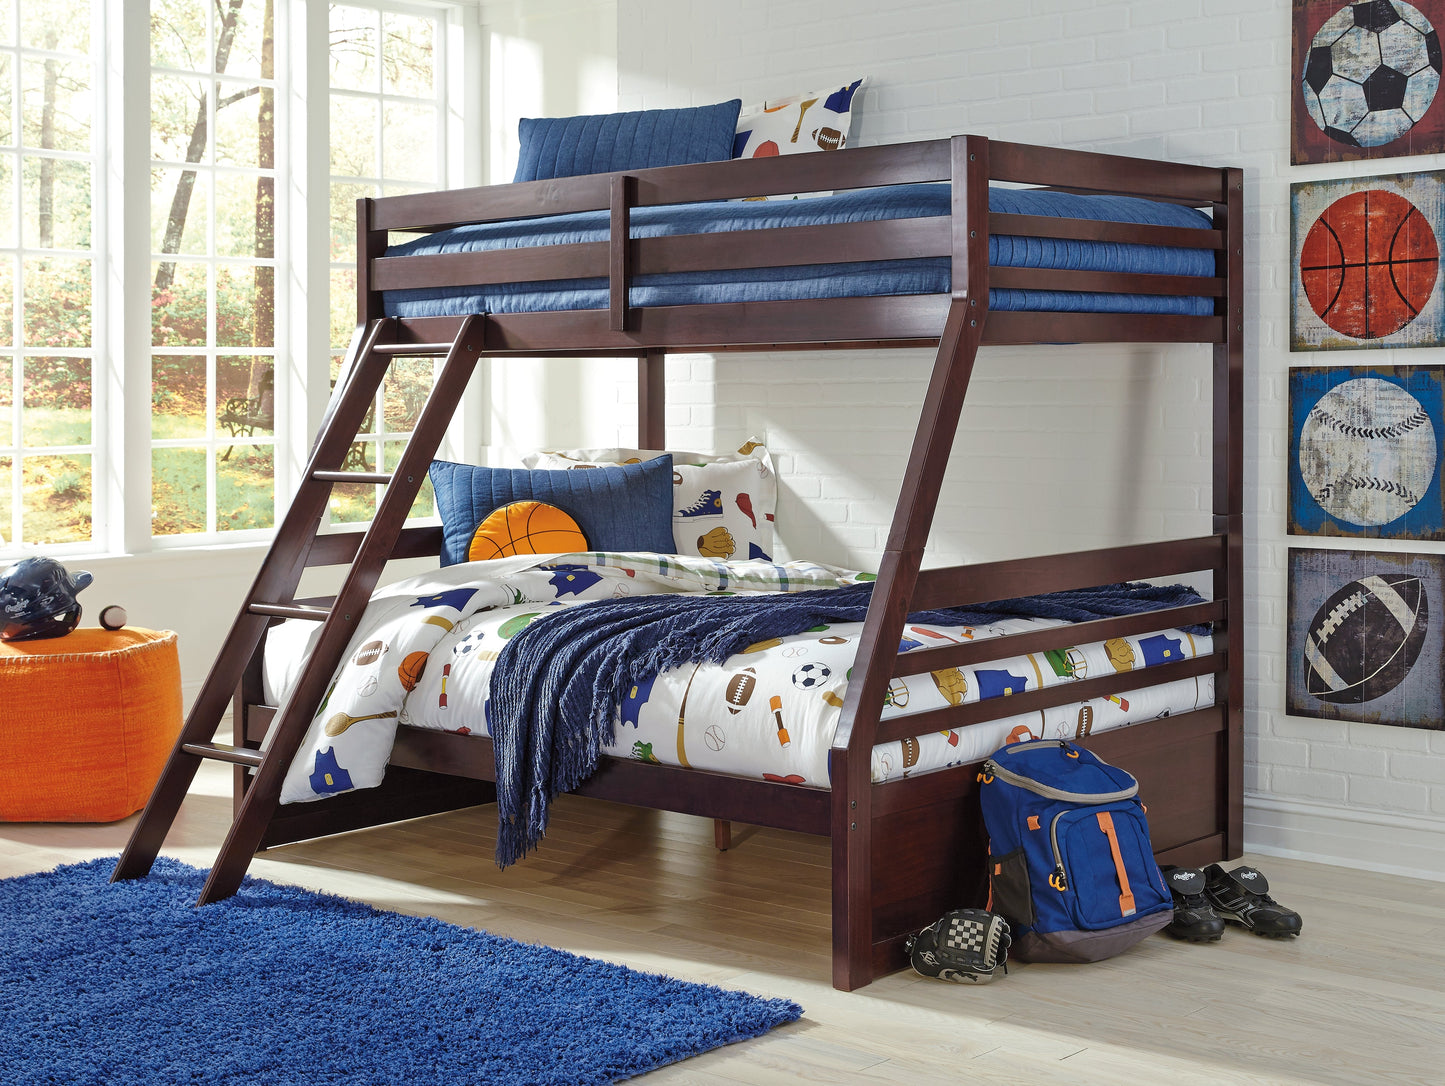 Halanton Brown Twin over Full Bunk Bedroom Set with Twin and Full Mattresses